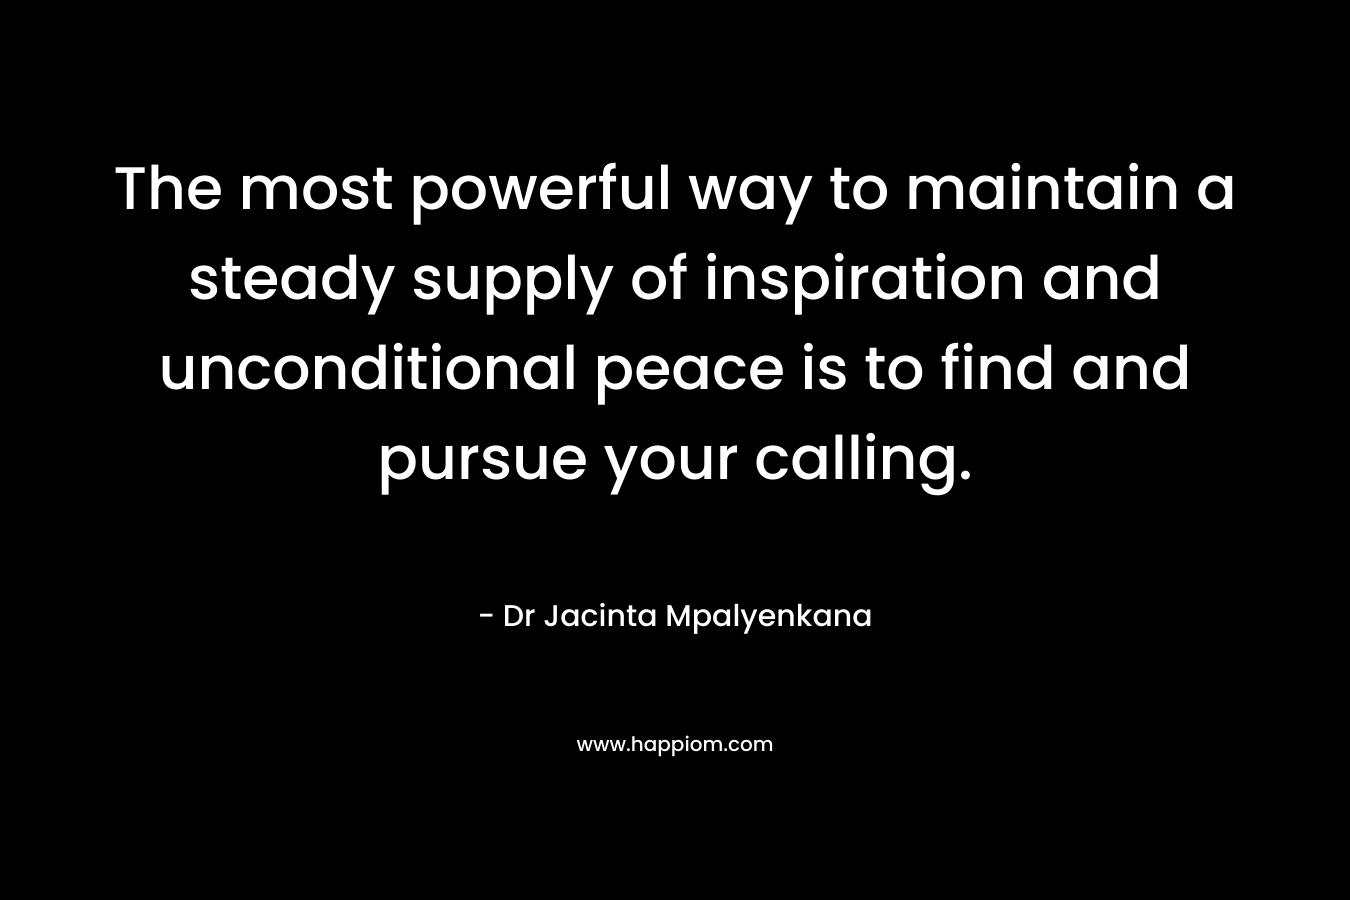 The most powerful way to maintain a steady supply of inspiration and unconditional peace is to find and pursue your calling. – Dr Jacinta Mpalyenkana